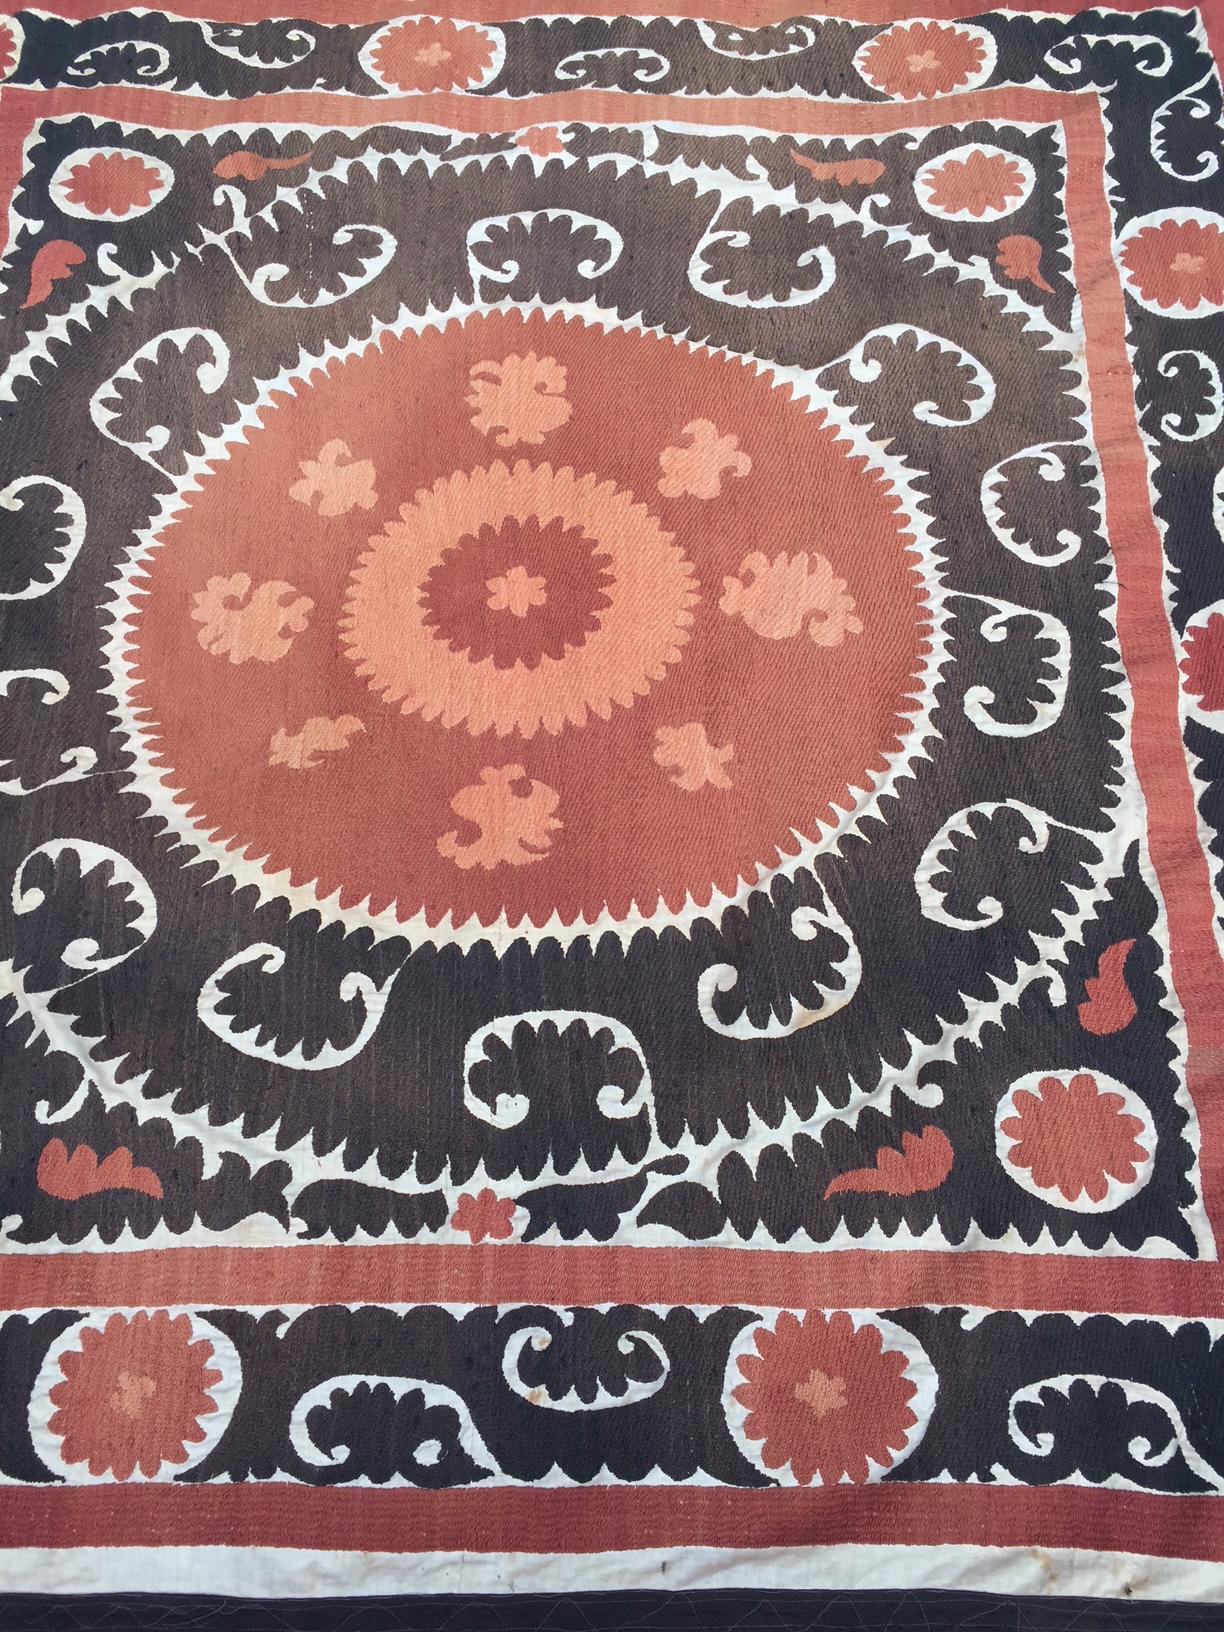 Vintage hand embroidered Suzani textile from the Samarkand region of Uzbekistan. Embroidered by hand cotton thread on cotton base fabric.